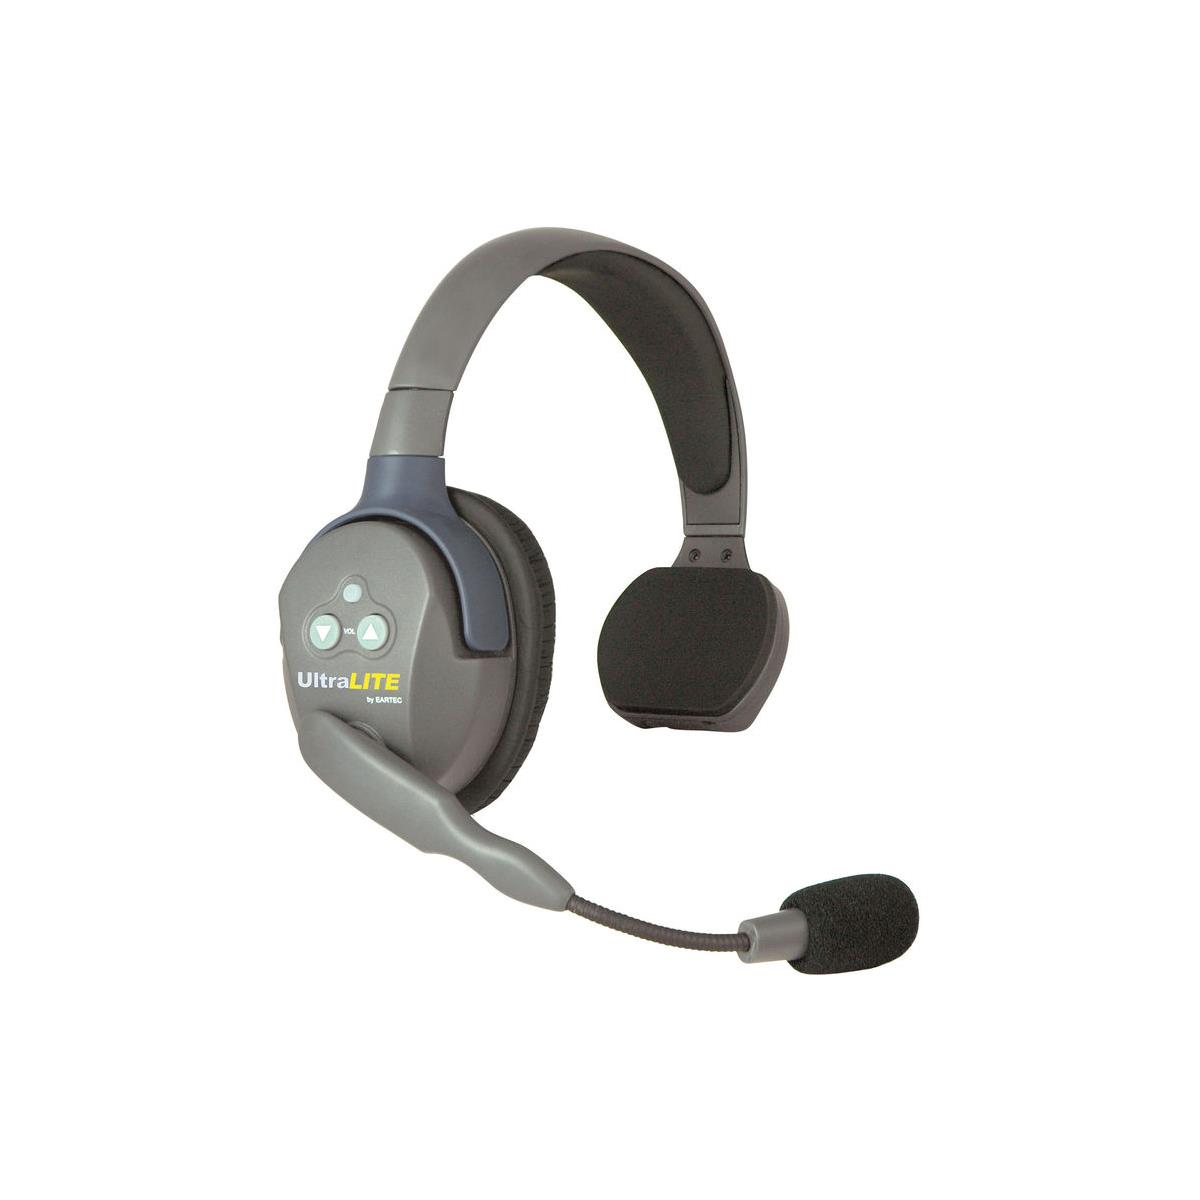 Image of Eartec UltraLITE Single Master Headset with Microphone